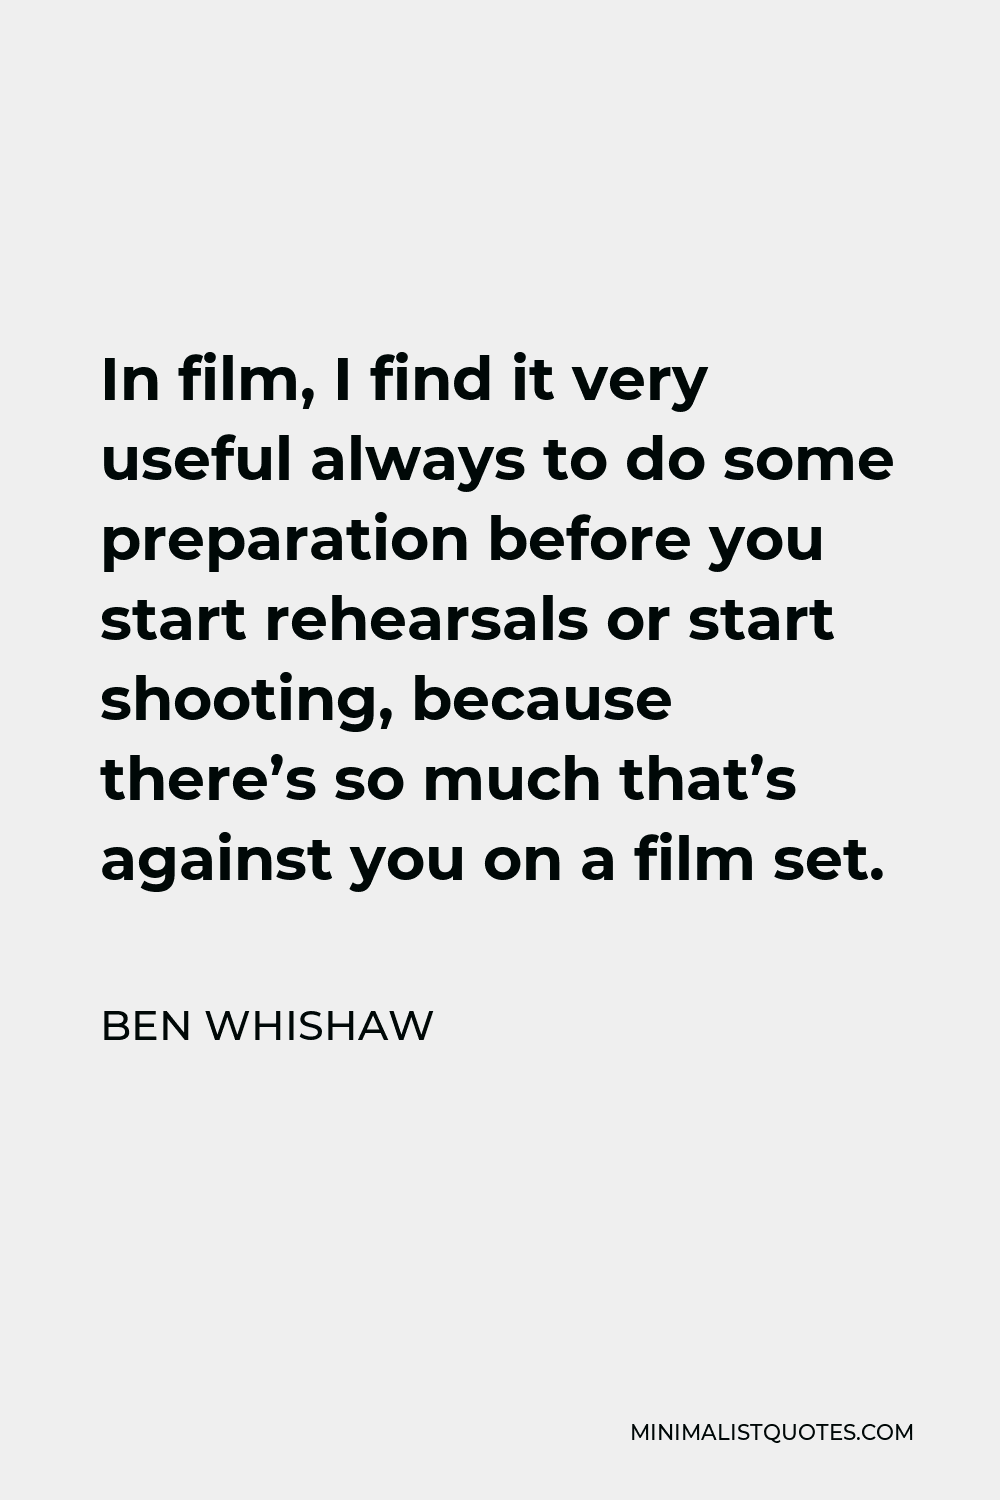 Ben Whishaw Quote - In film, I find it very useful always to do some preparation before you start rehearsals or start shooting, because there’s so much that’s against you on a film set.